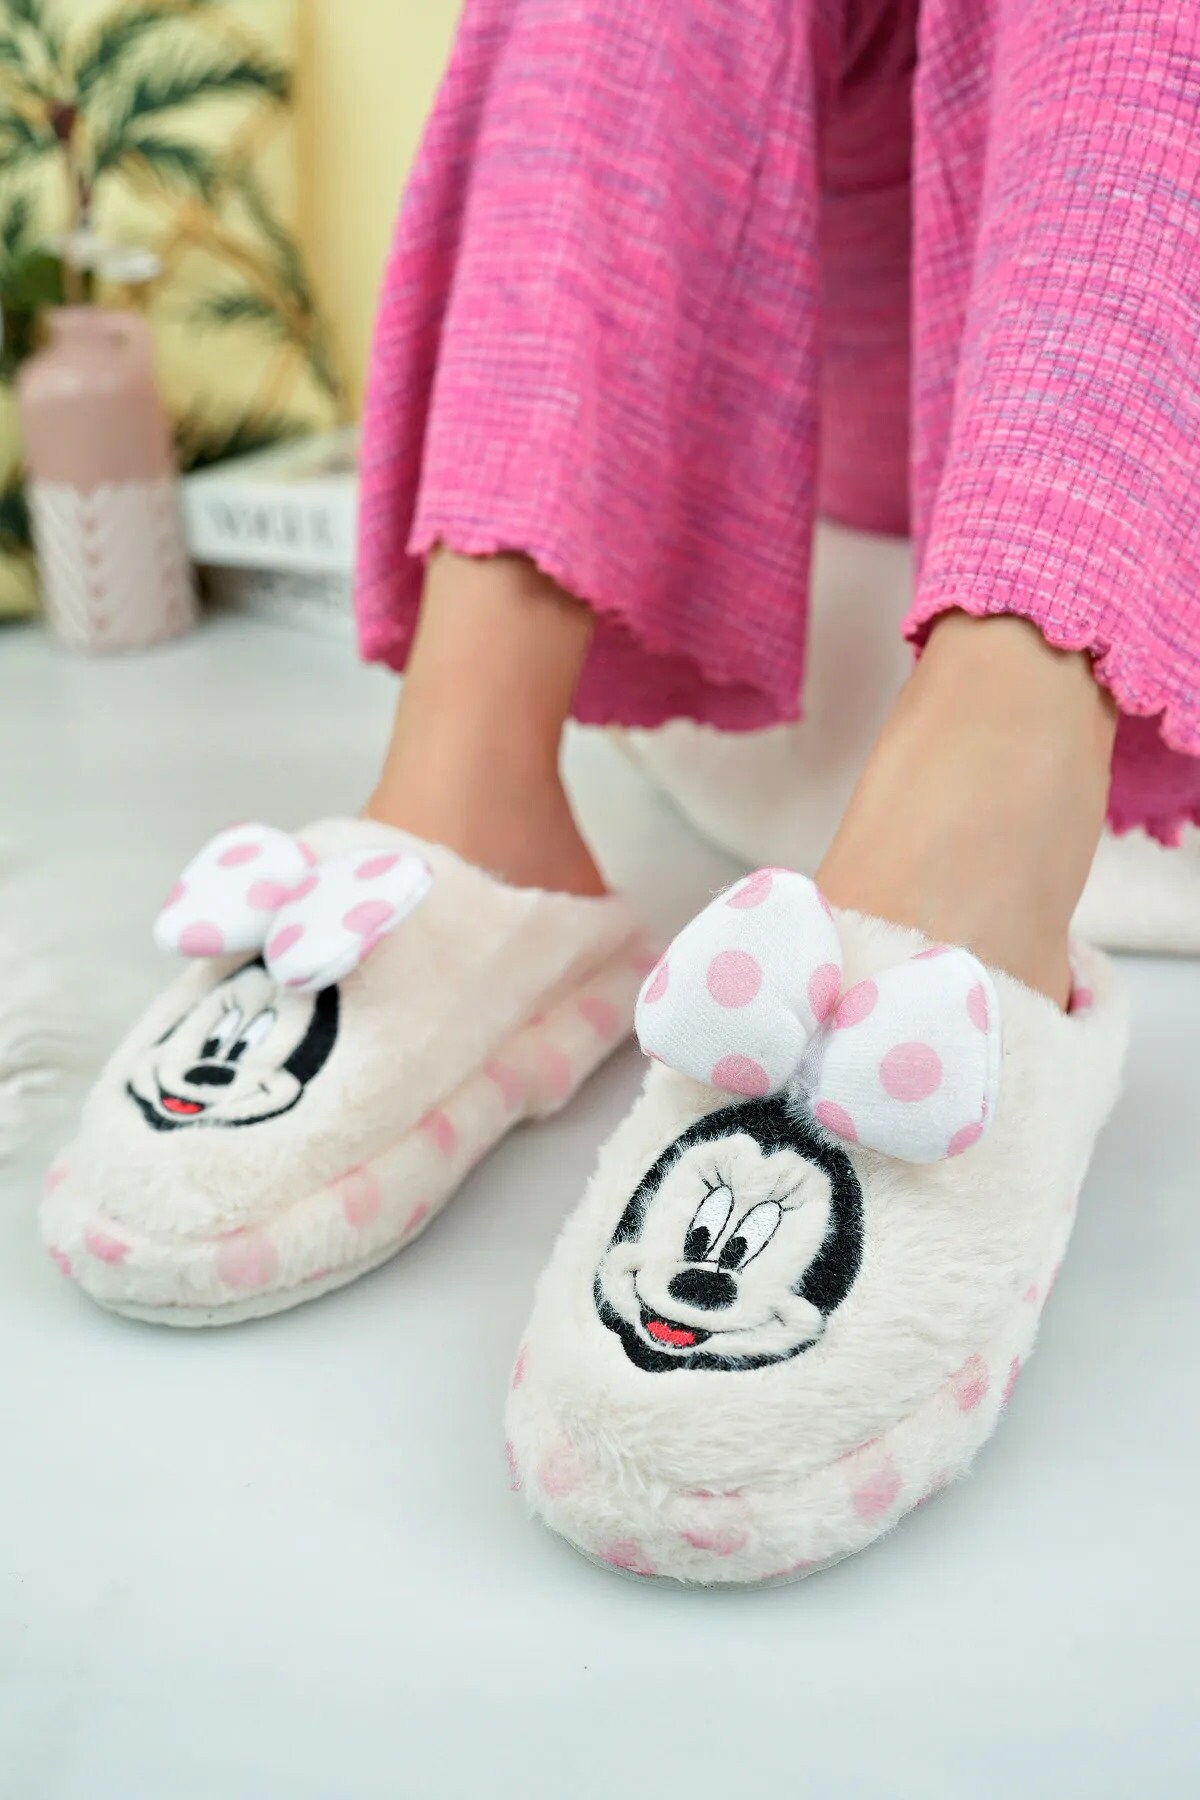 Woman Slippers Memory Foam Super Soft Fuzzy Anti-Skid Indoor  Slippers,Creative Gifts for Women Mom Girlfriend